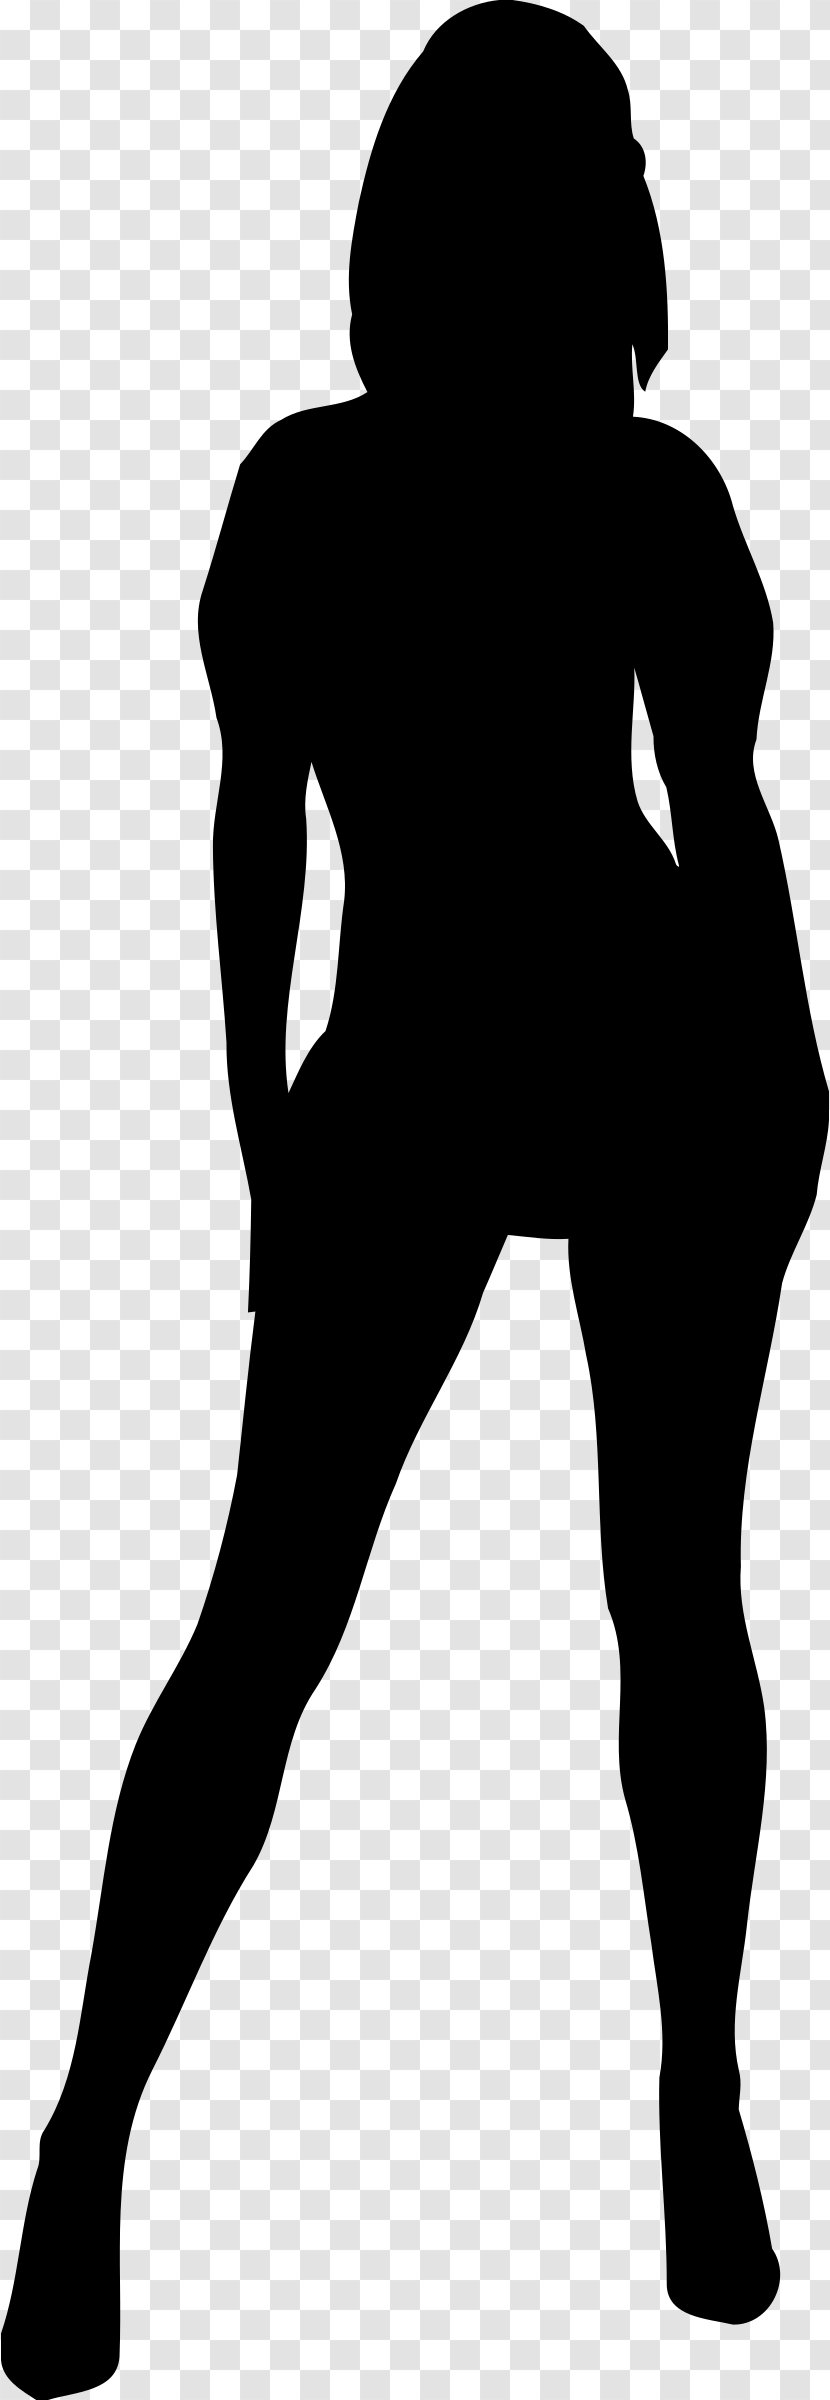 Catwoman Silhouette Female Clip Art - Standing - Woman Transparent PNG